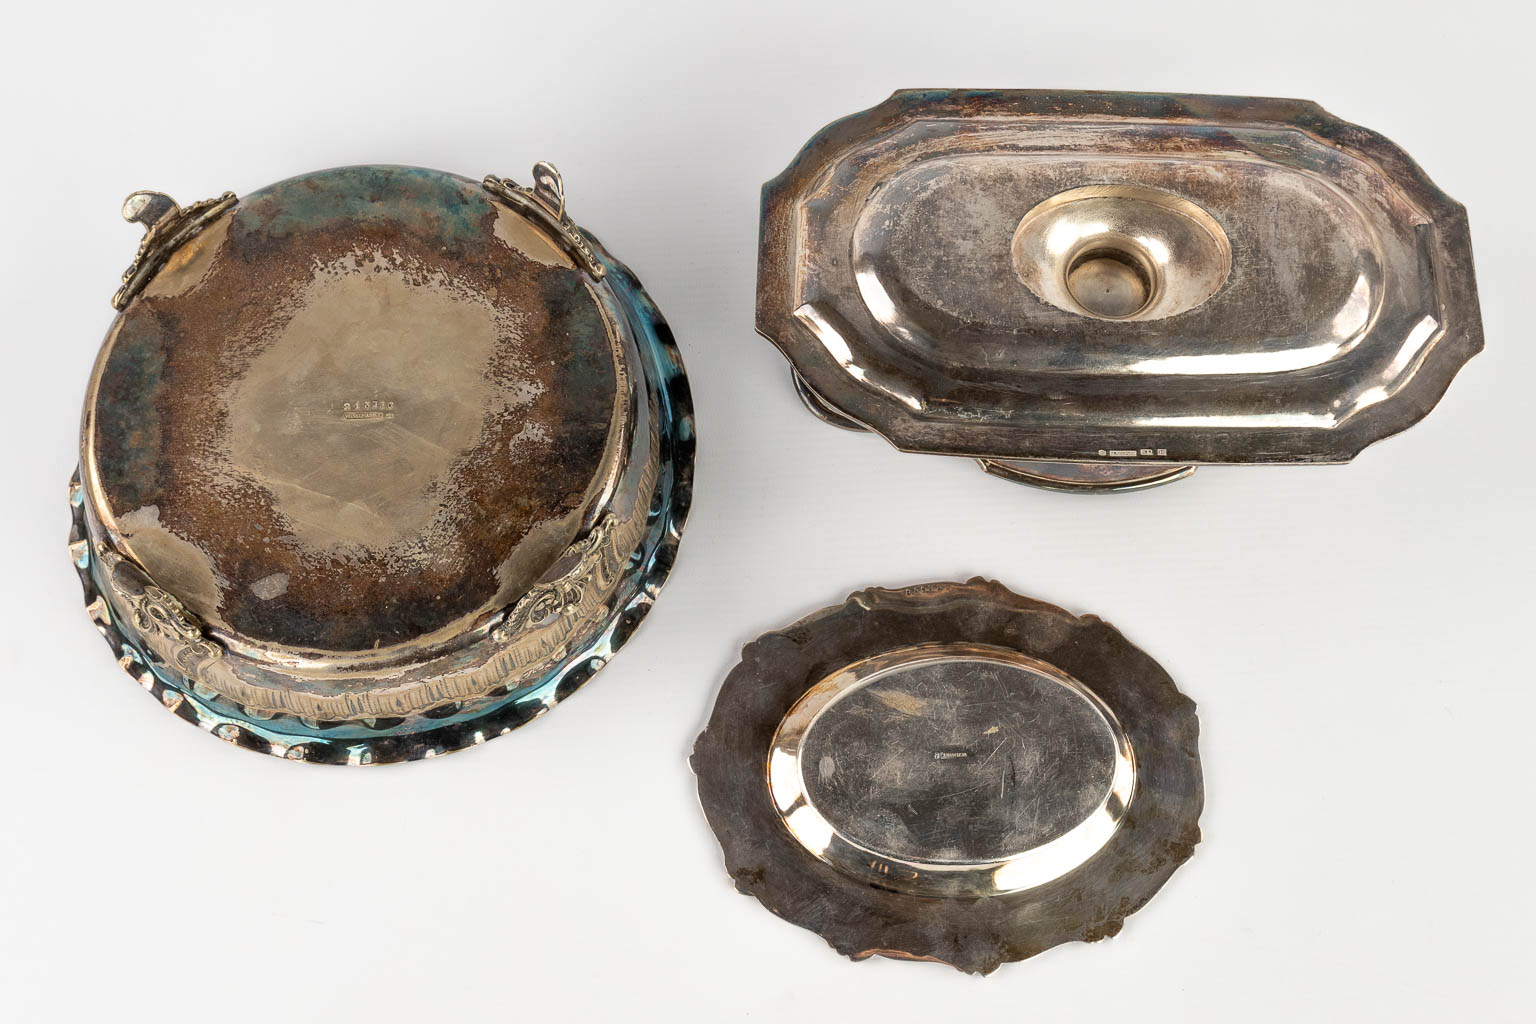 A set of table accessories and utensils, silver-plated metal. (H:8 x D:22 cm) - Image 19 of 23